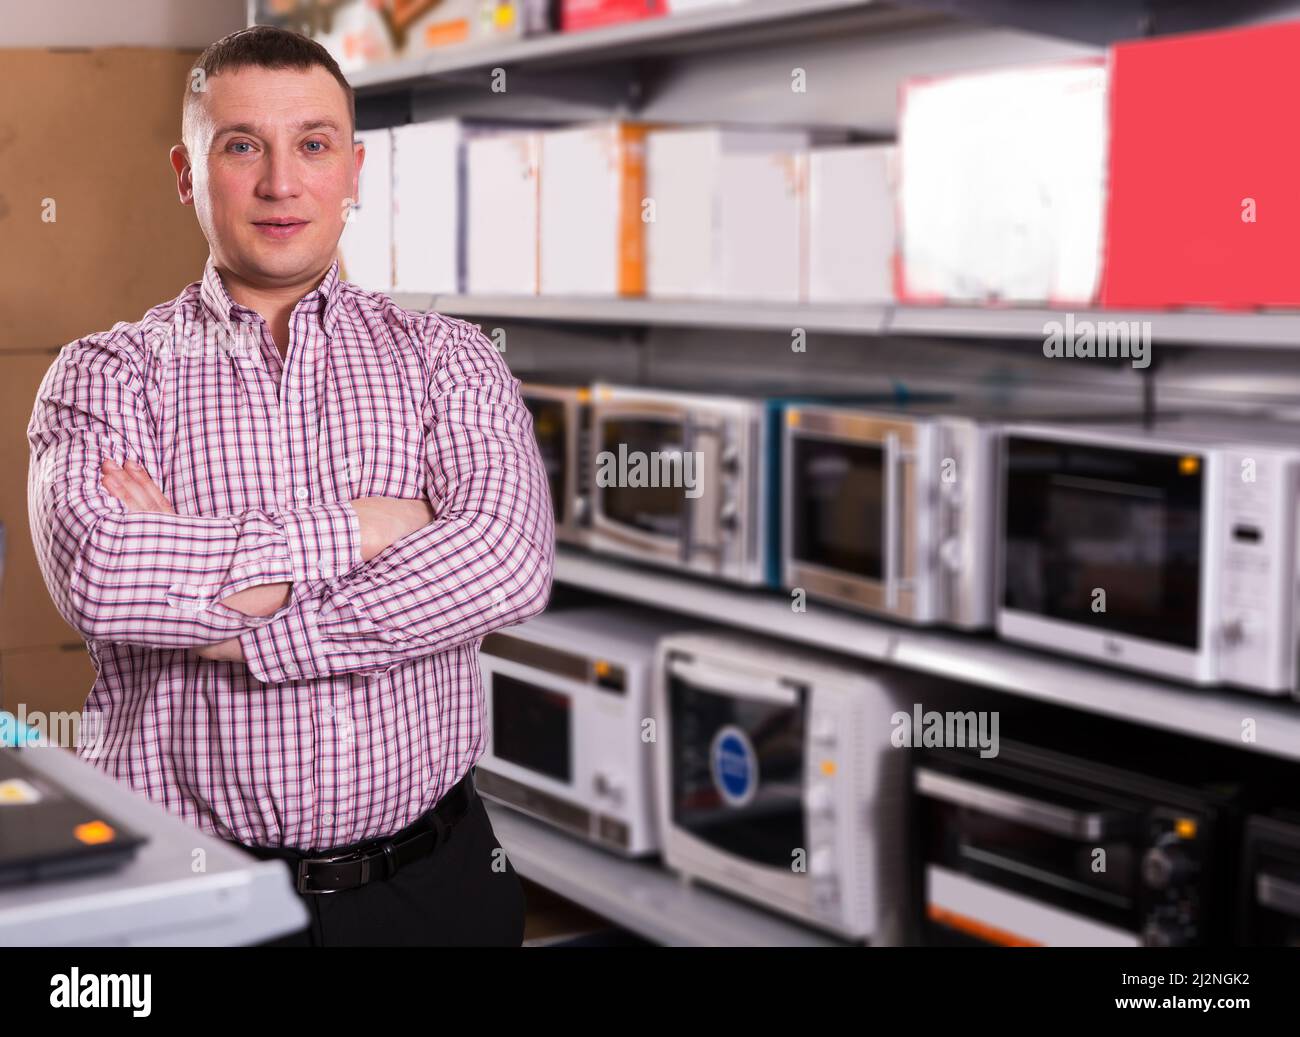 Middle-class man in appliances store Stock Photo